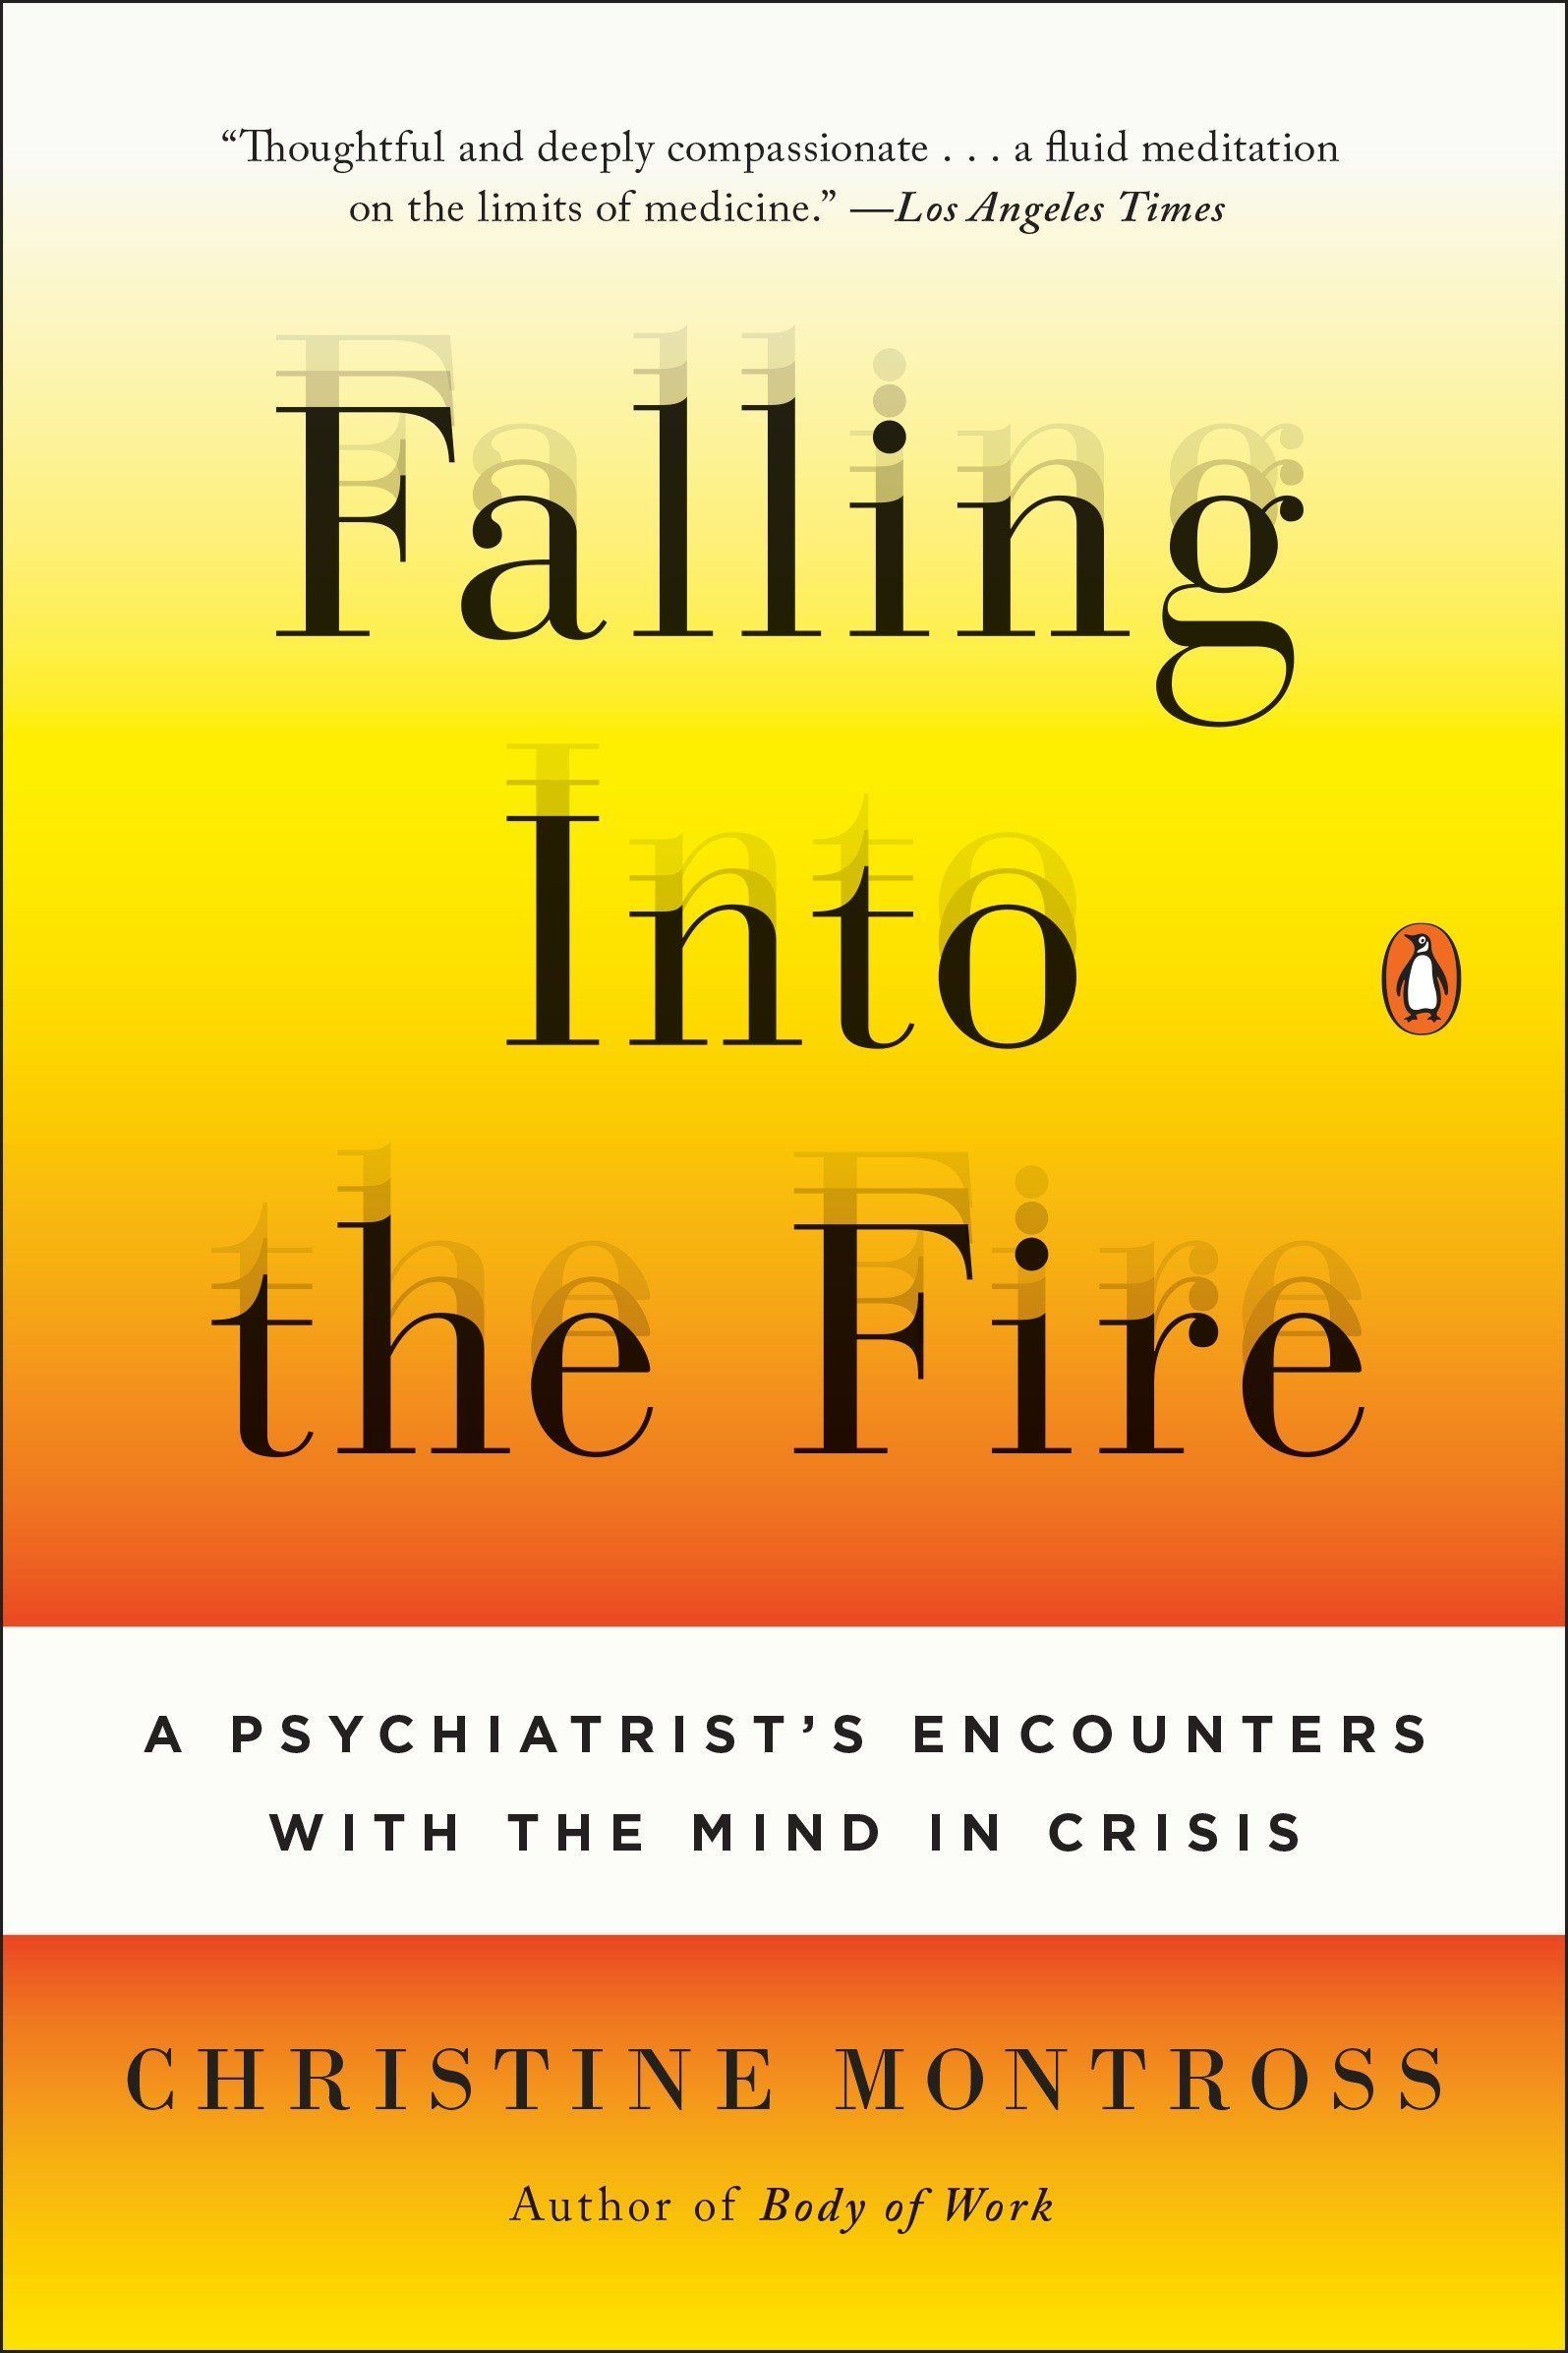 Book Cover - Falling Into the Fire: A Psychiatrist's Encounters with the Mind in Crisis by Christine Montross (2013)